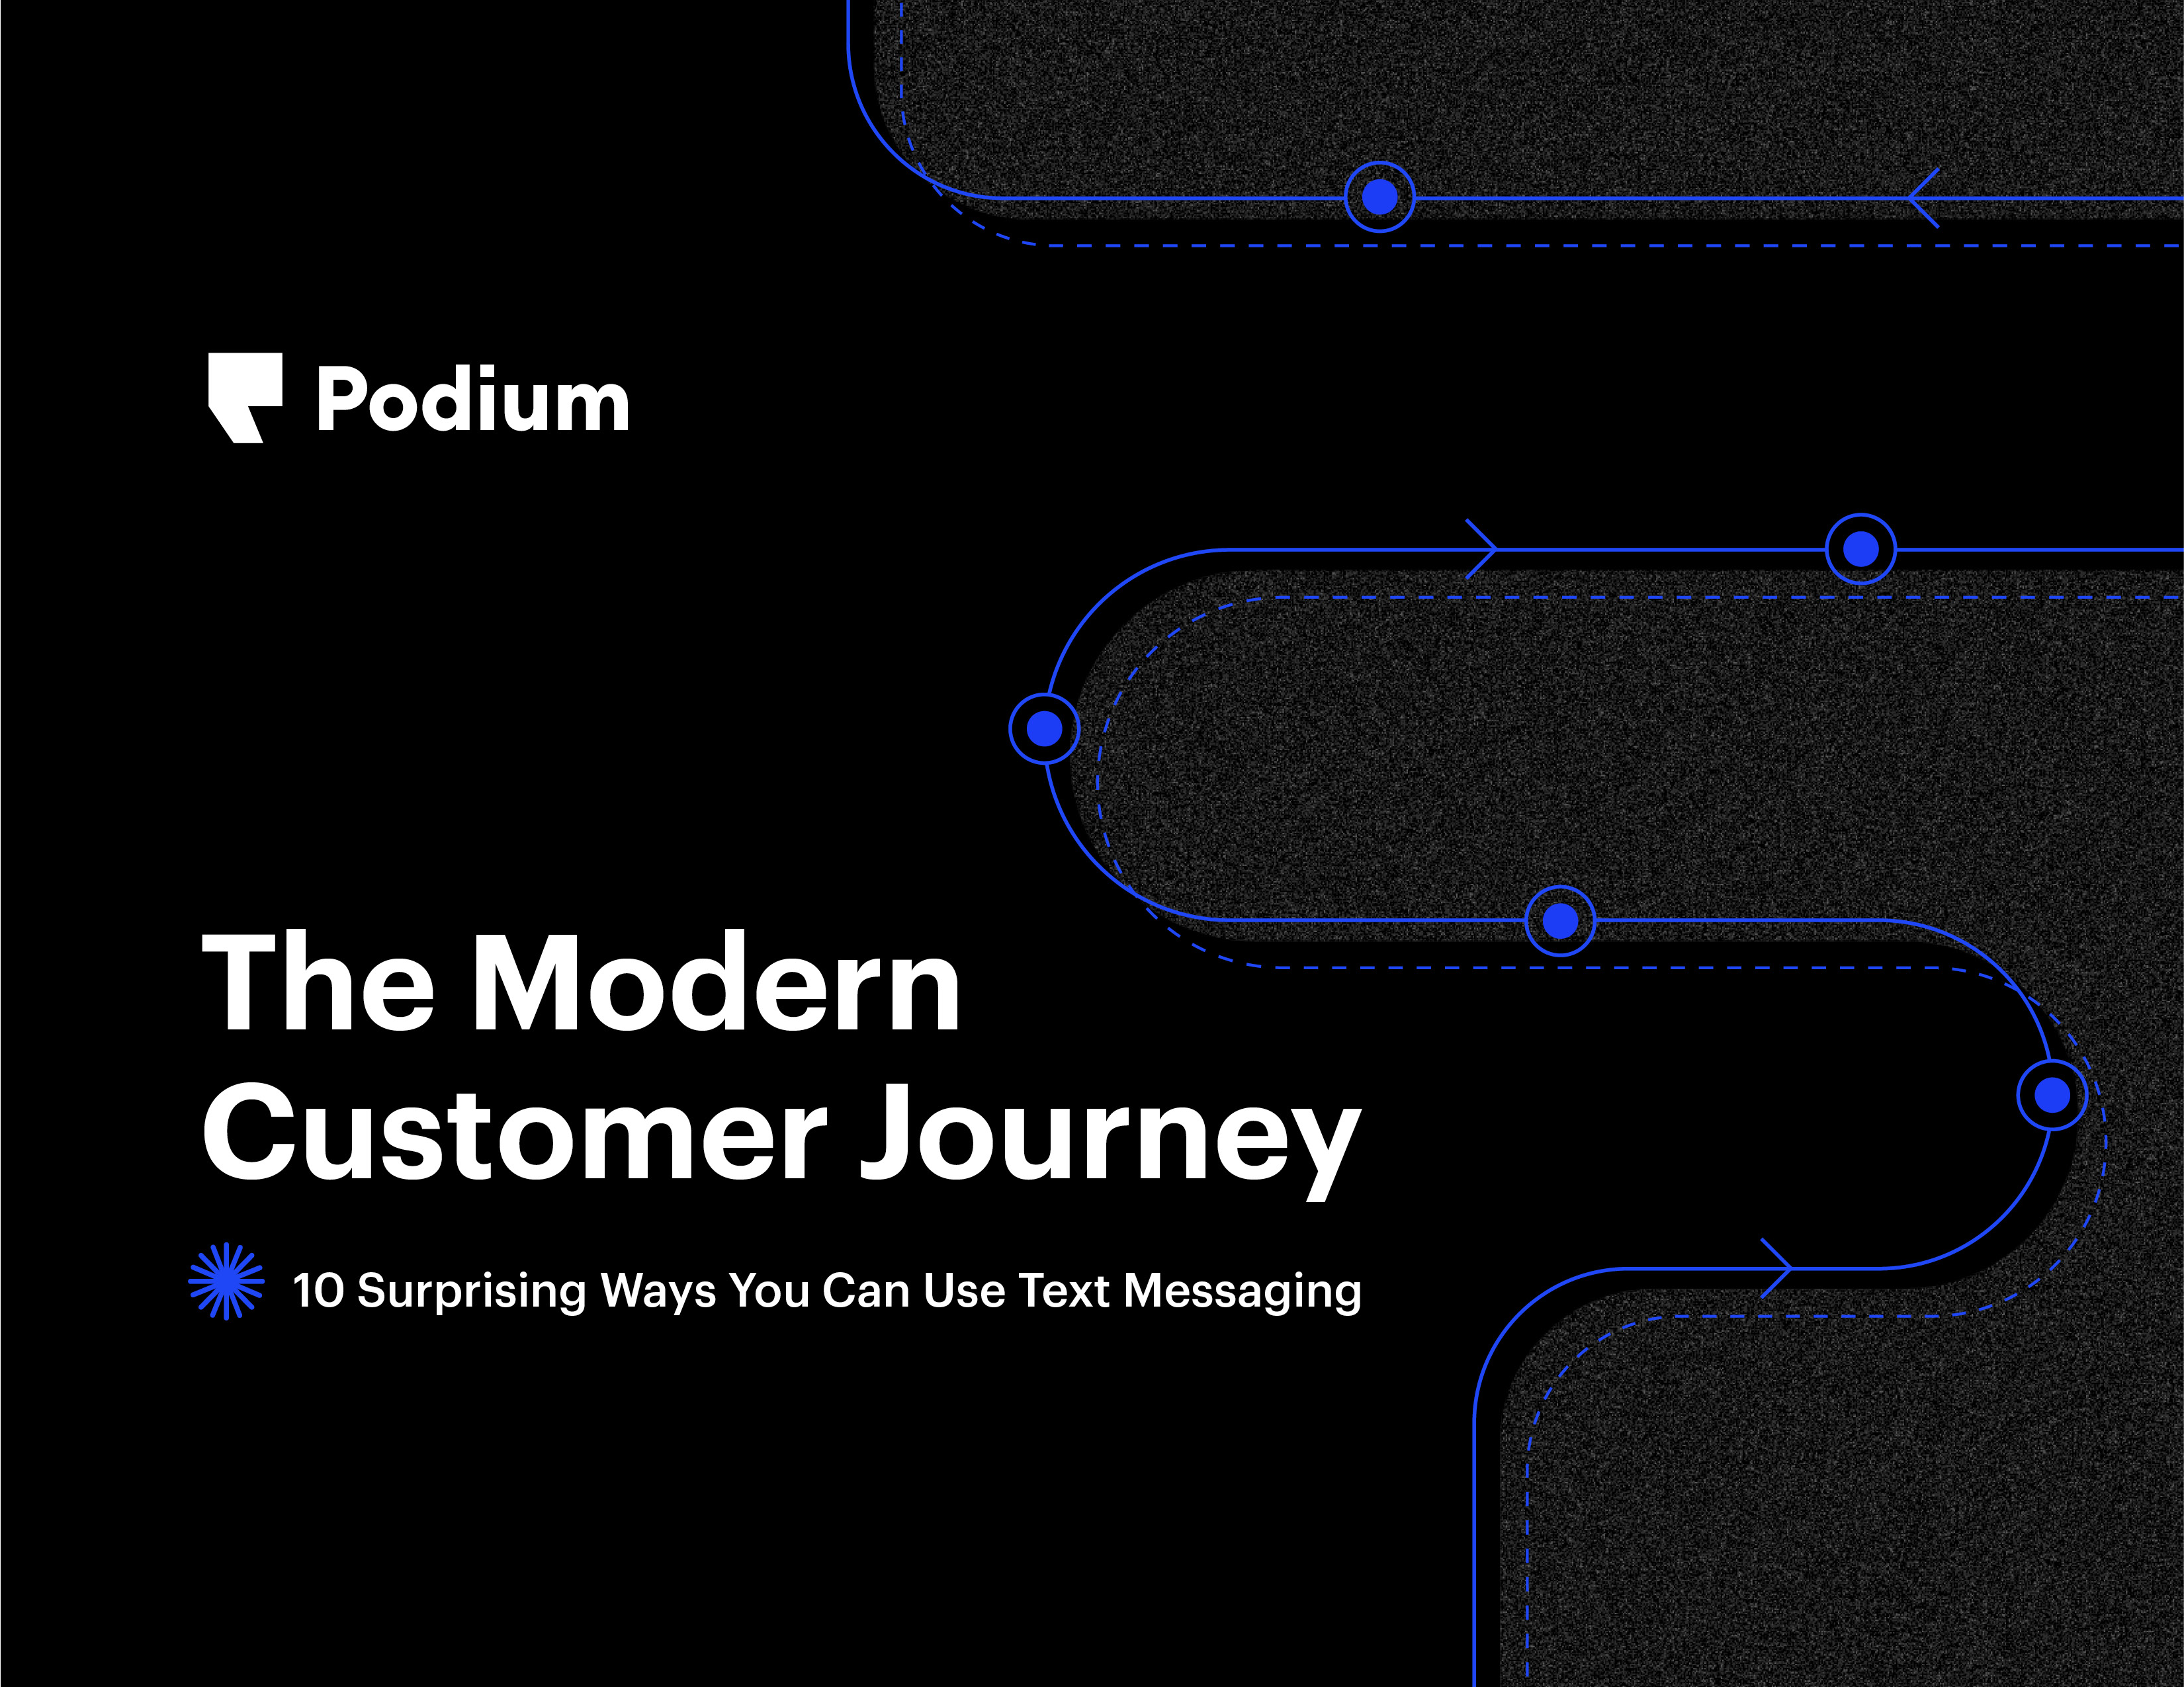 The Modern Customer Journey- 10 Ways to text